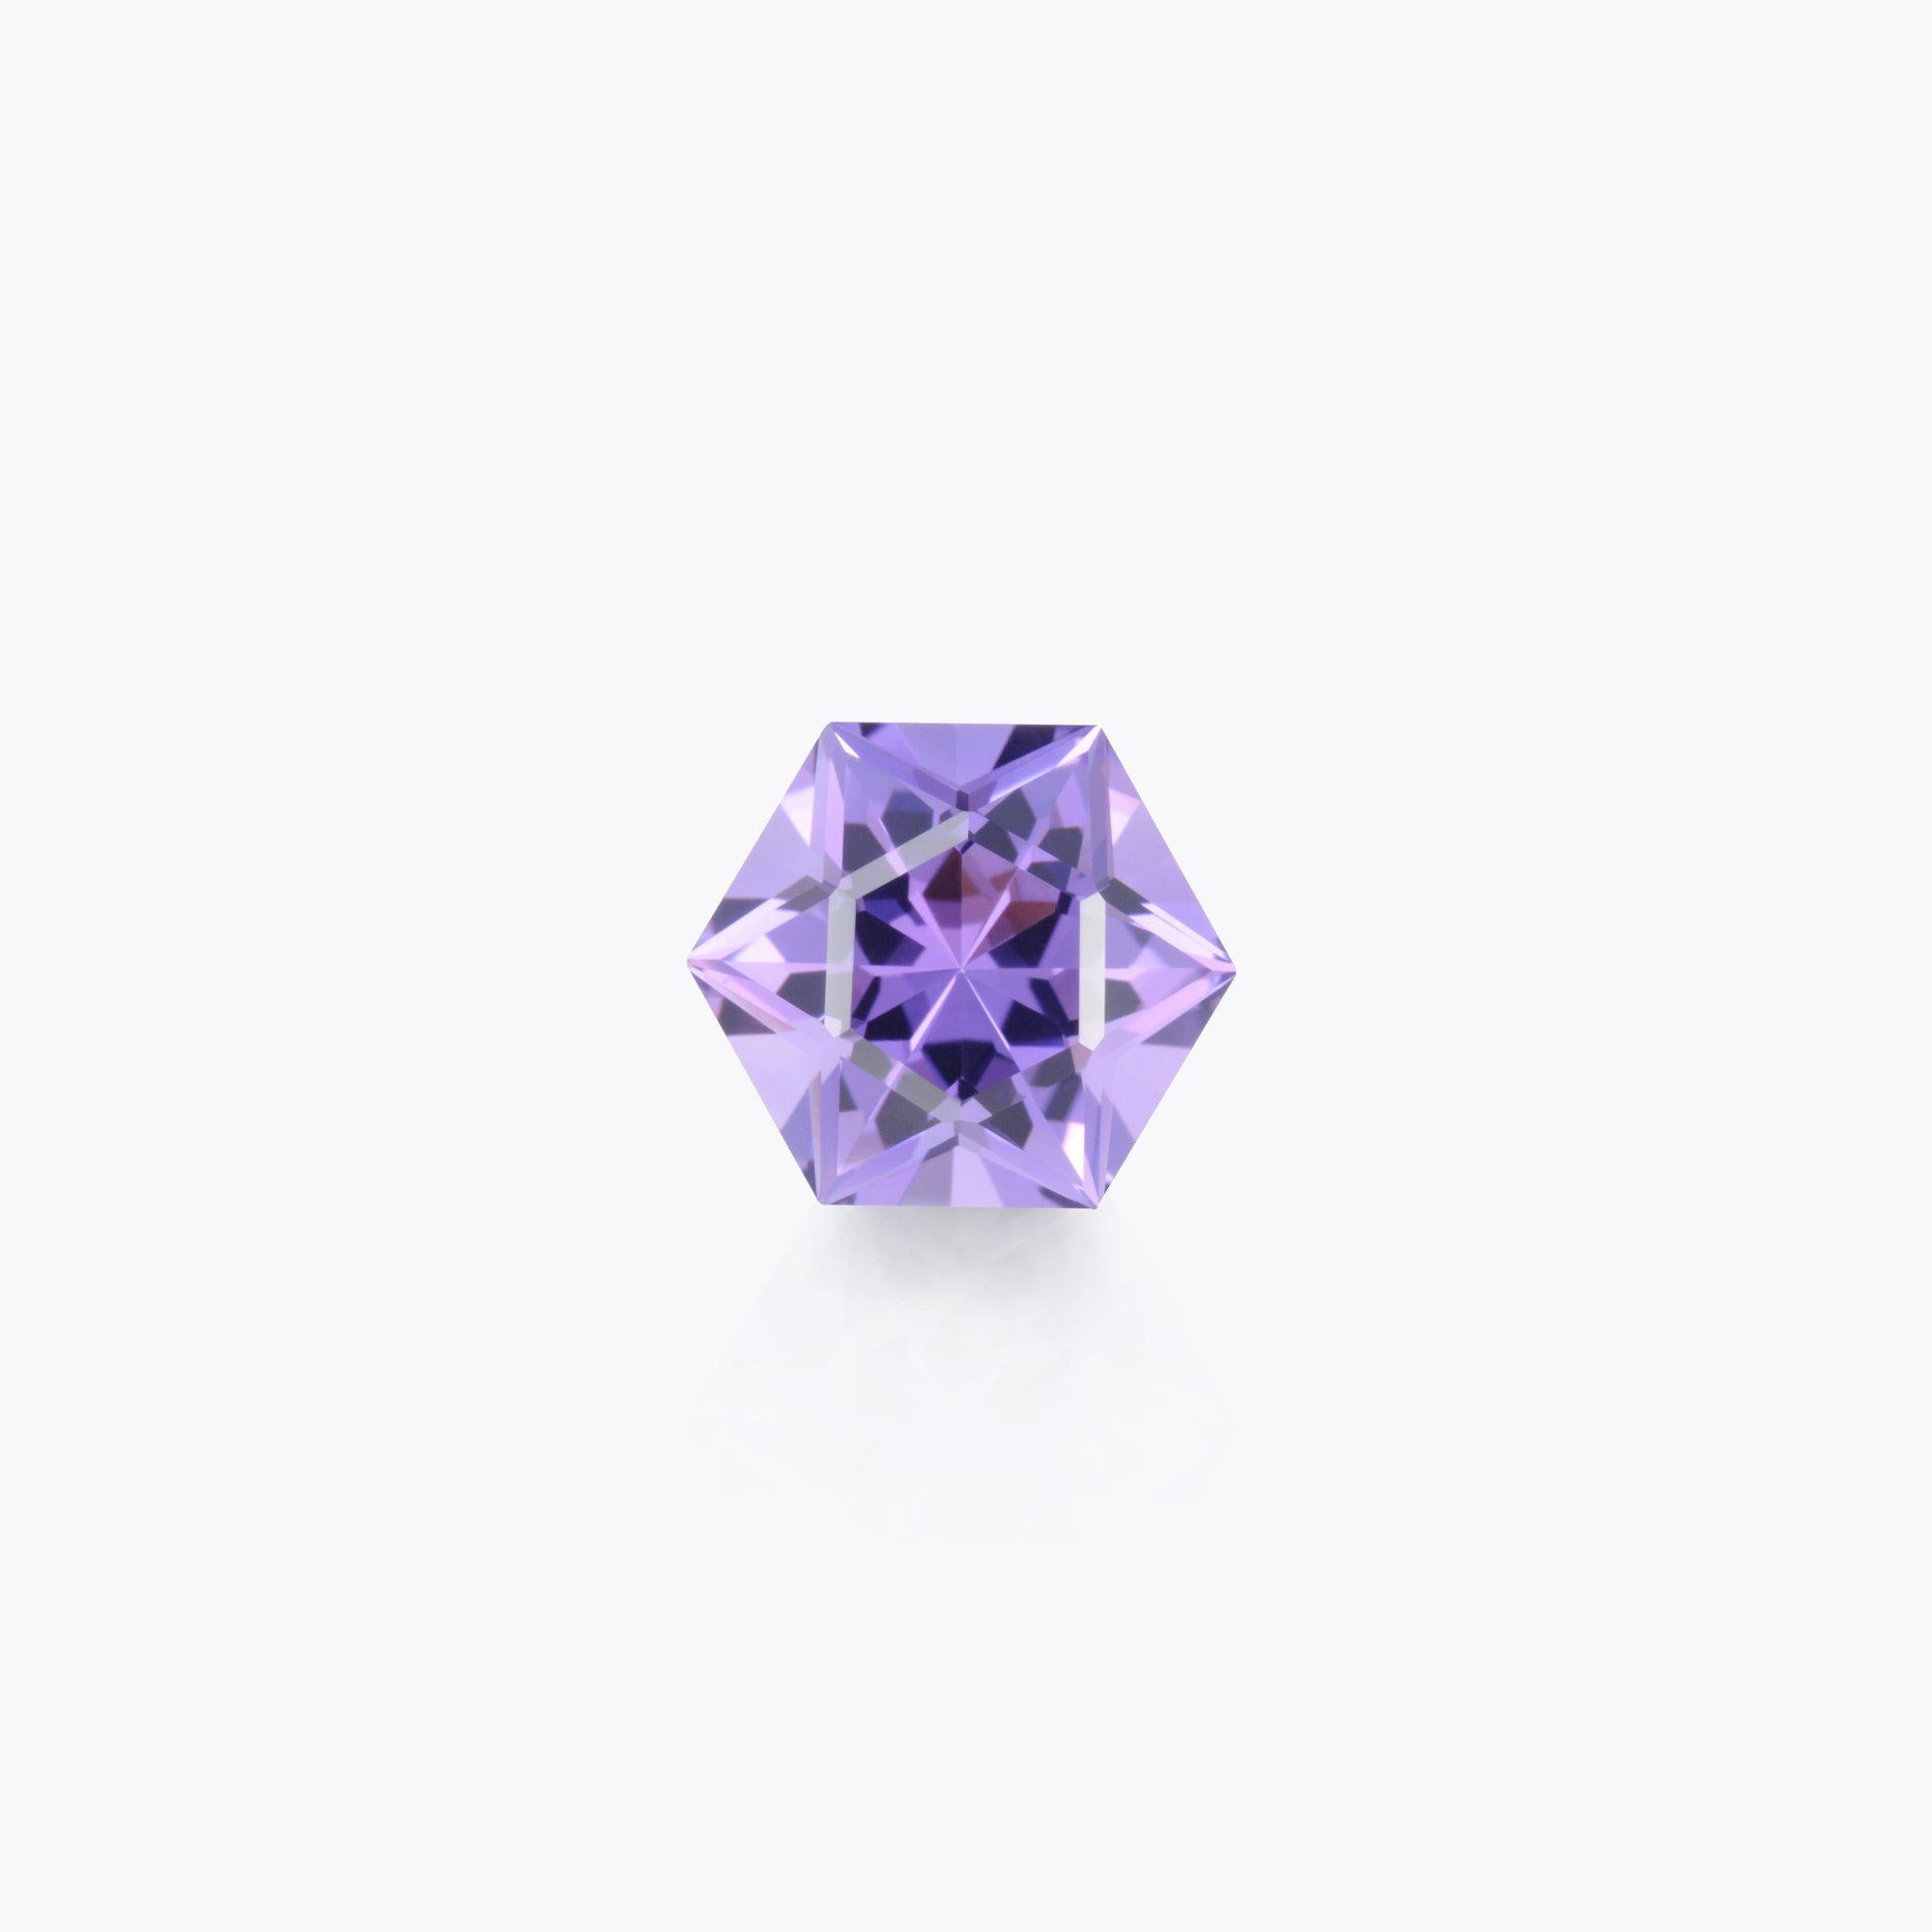 Unique 9.10 carat hexagon Amethyst gem offered loose to a lady or gentleman. The cutting pattern of this special Amethyst showcases a Star of David.
Returns are accepted and paid by us within 7 days of delivery.
We offer supreme custom jewelry work